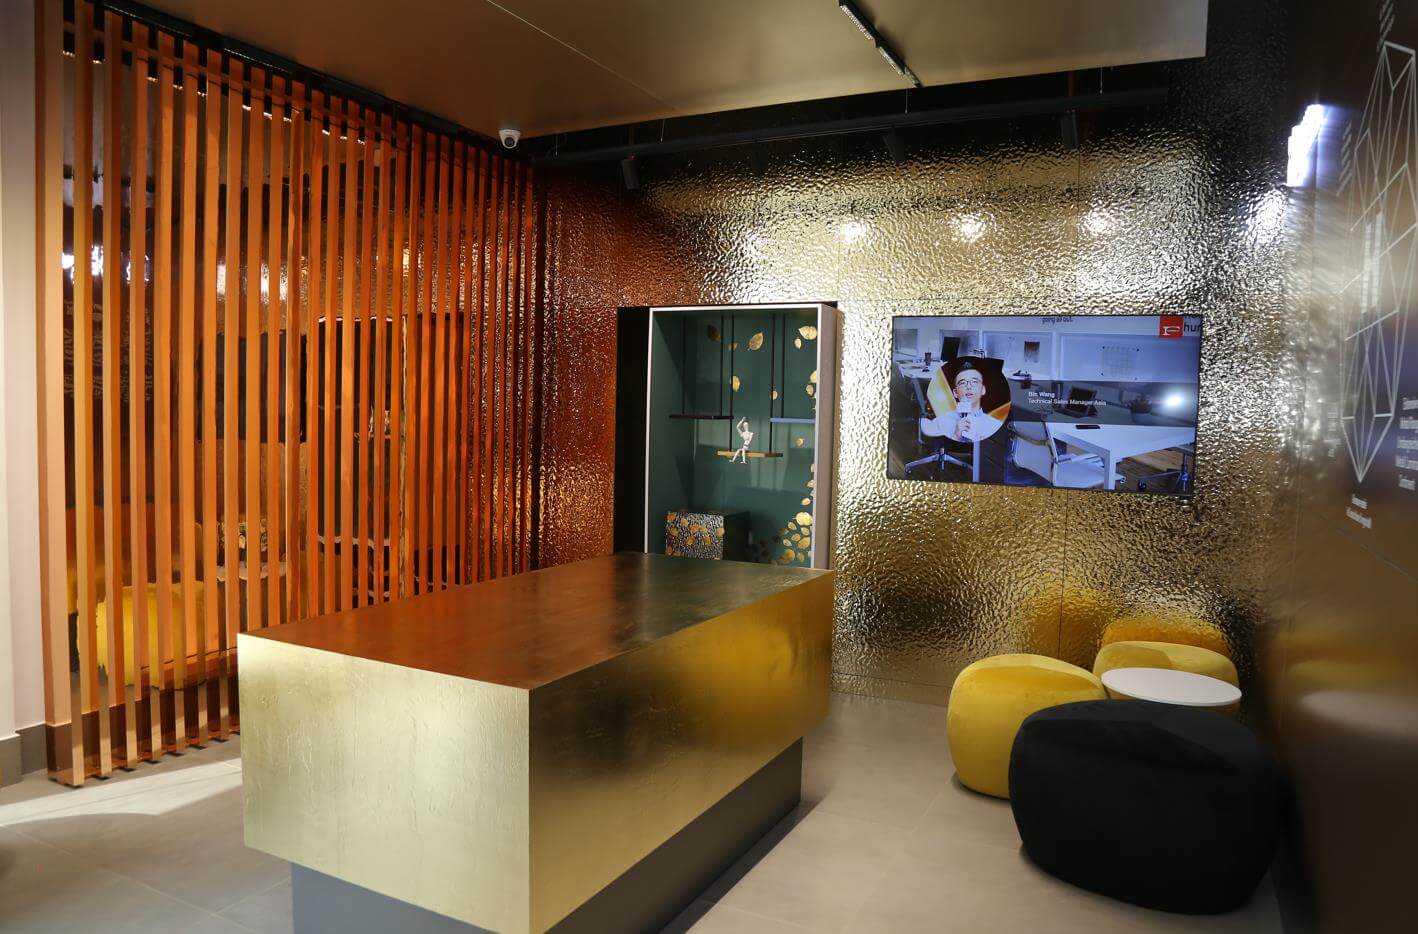 extravagant office space with premium laminate surfaces golden furniture and slated partition